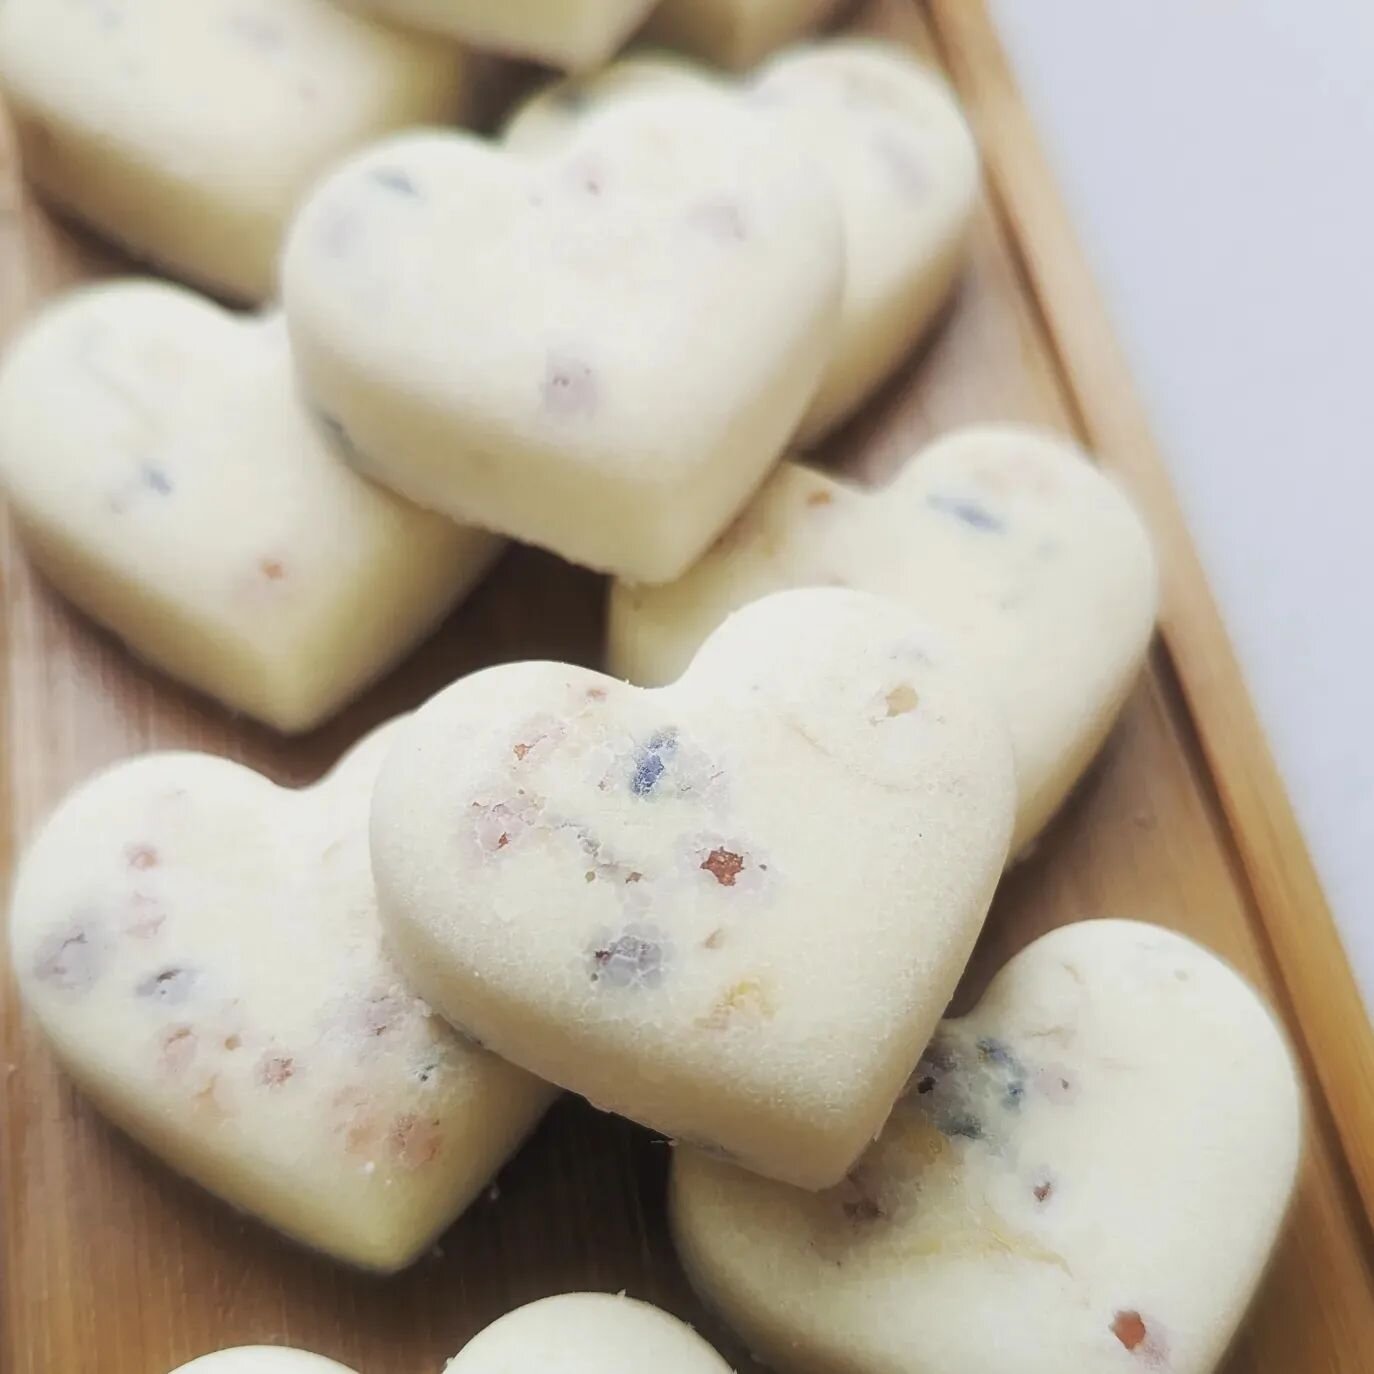 #TubTuesday treats...on a Thursday!! 😛 We brought these luscious Bath Truffles back as a *limited* edition through Mother's Day (5/14/23)!! Find them in our online bath collection or IRL @fogcityflea. Tiny but mighty...they come in a set of 3...enjo